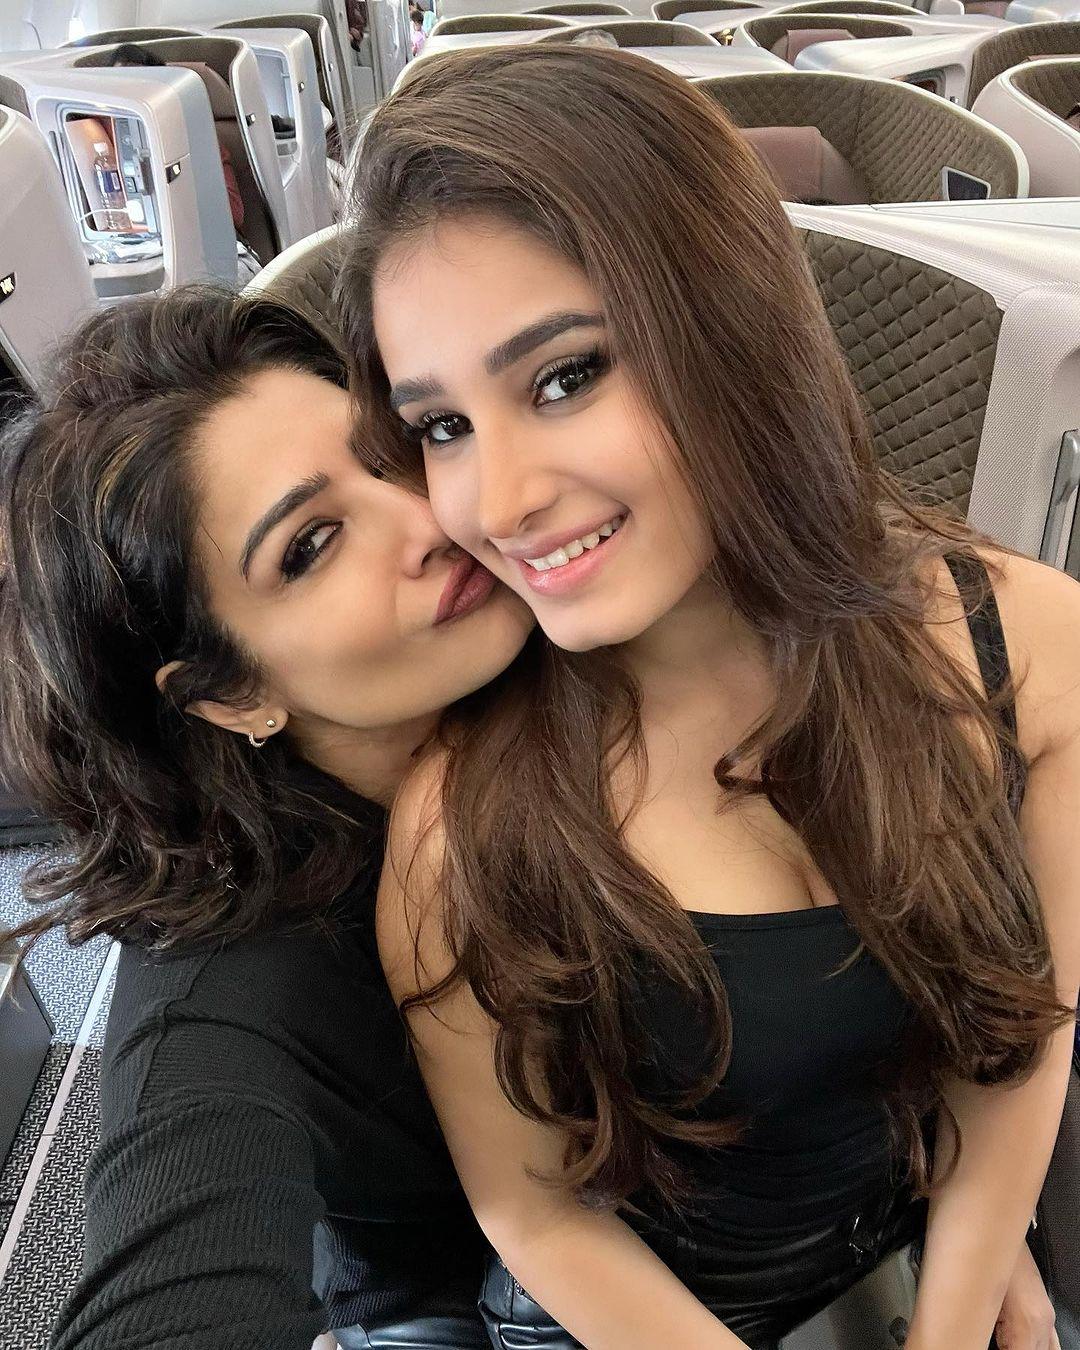 Raveena Tandon, the timeless Bollywood actress, is not only known for her acting skills but also for her role as a loving mother.